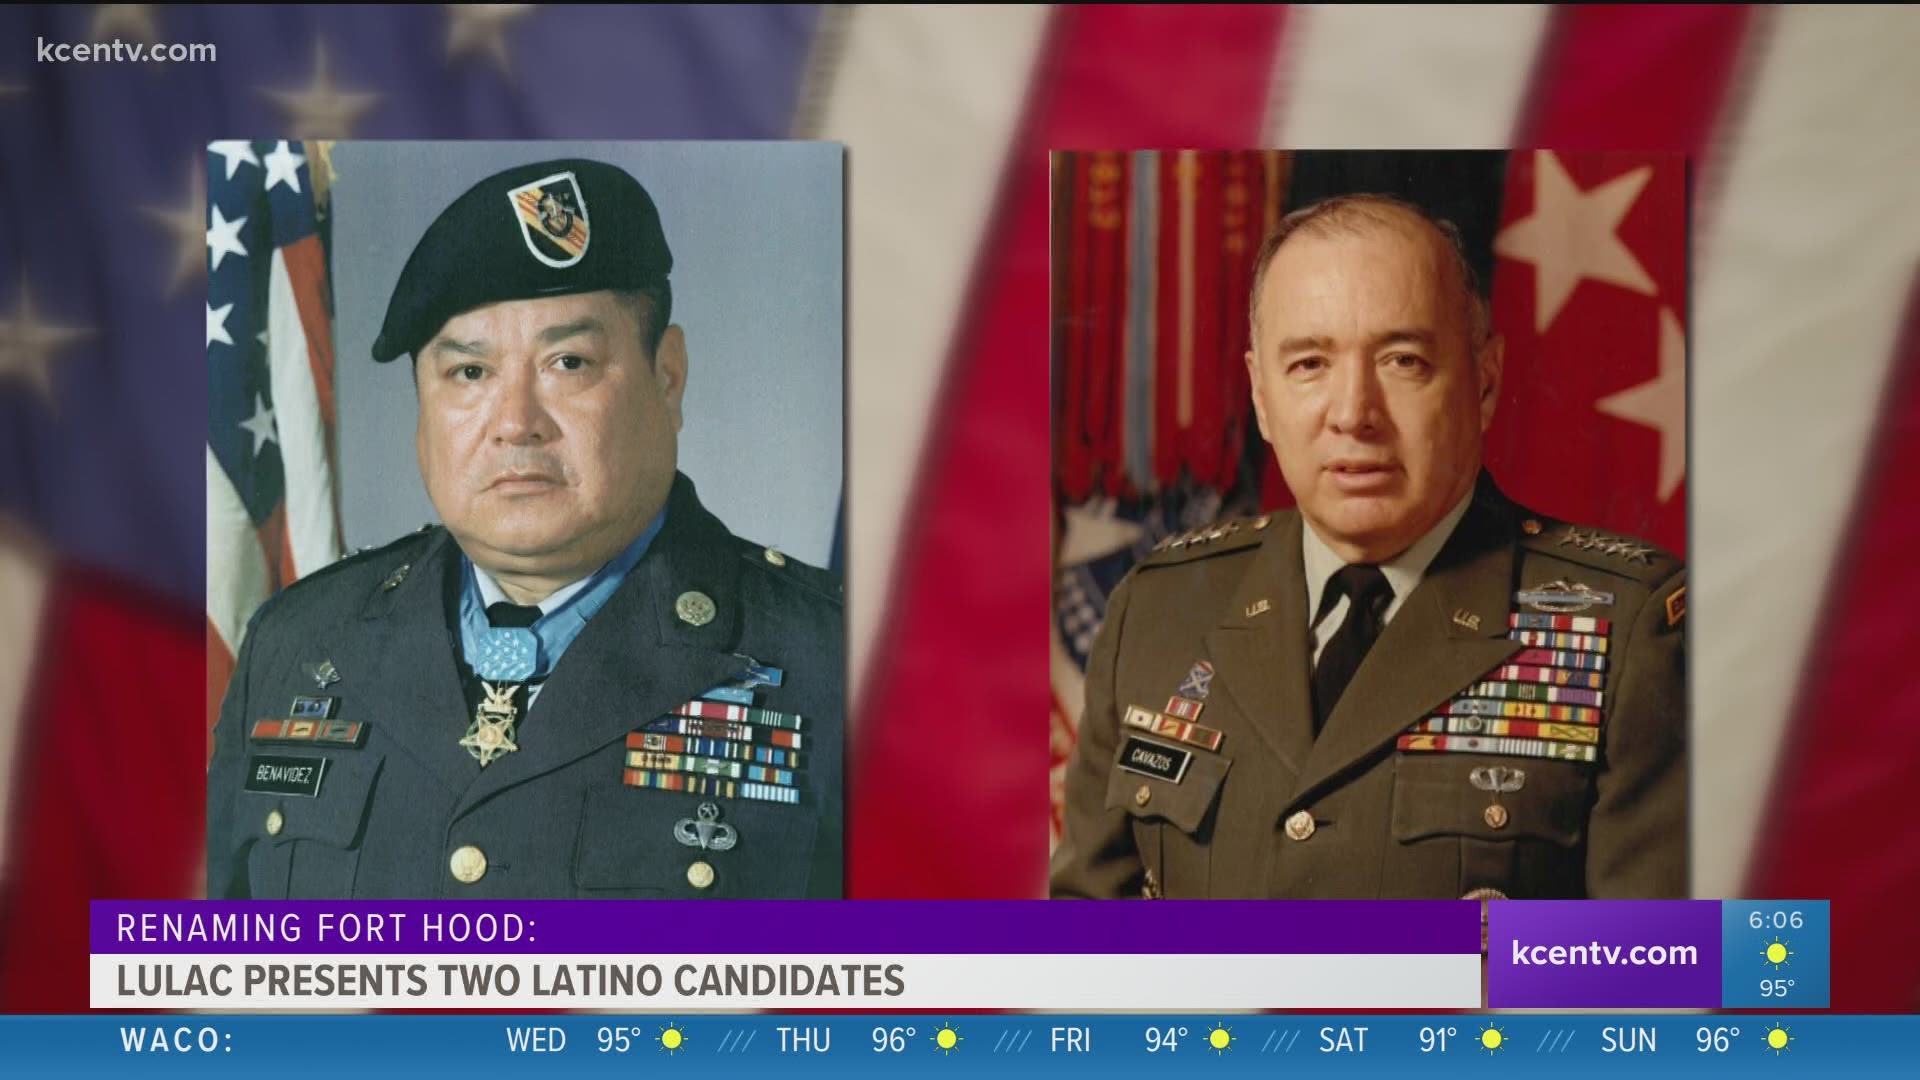 The League of United Latin American Citizens believes Fort Hood should be renamed after MSG Roy Benavidez or Maj. Gen. Richard Cavazos.